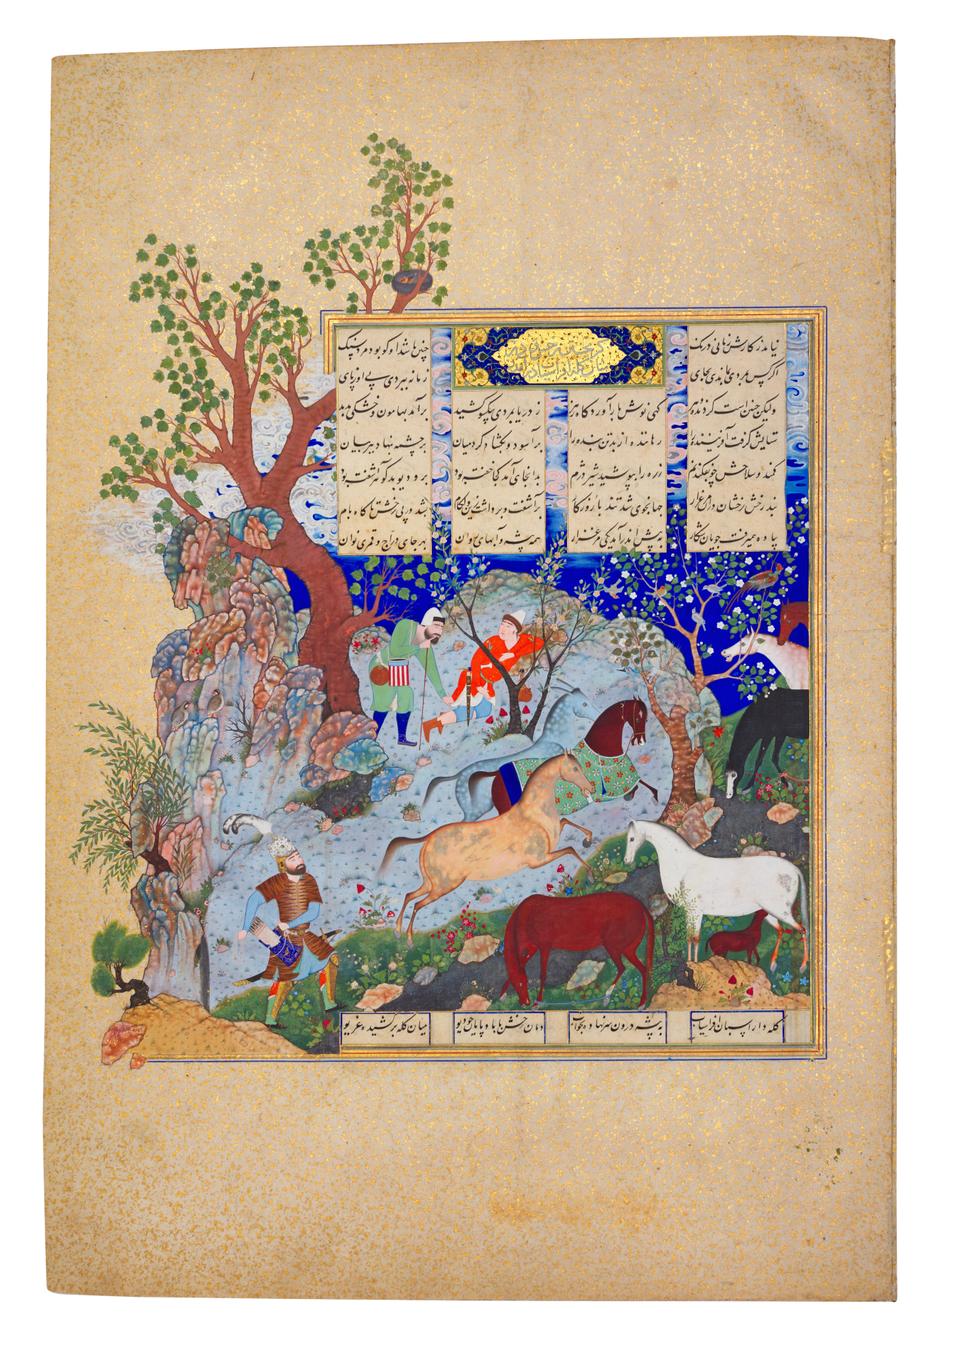 Rustam recovers Rakhsh from Afrasiyab's herd, illustrated folio from The Shahnameh of Shah Tahmasp, attributed to Mirza 'Ali, Persia, Tabriz, Royal Atelier, circa 1525-35 (est. £4,000,000-6,000,000).